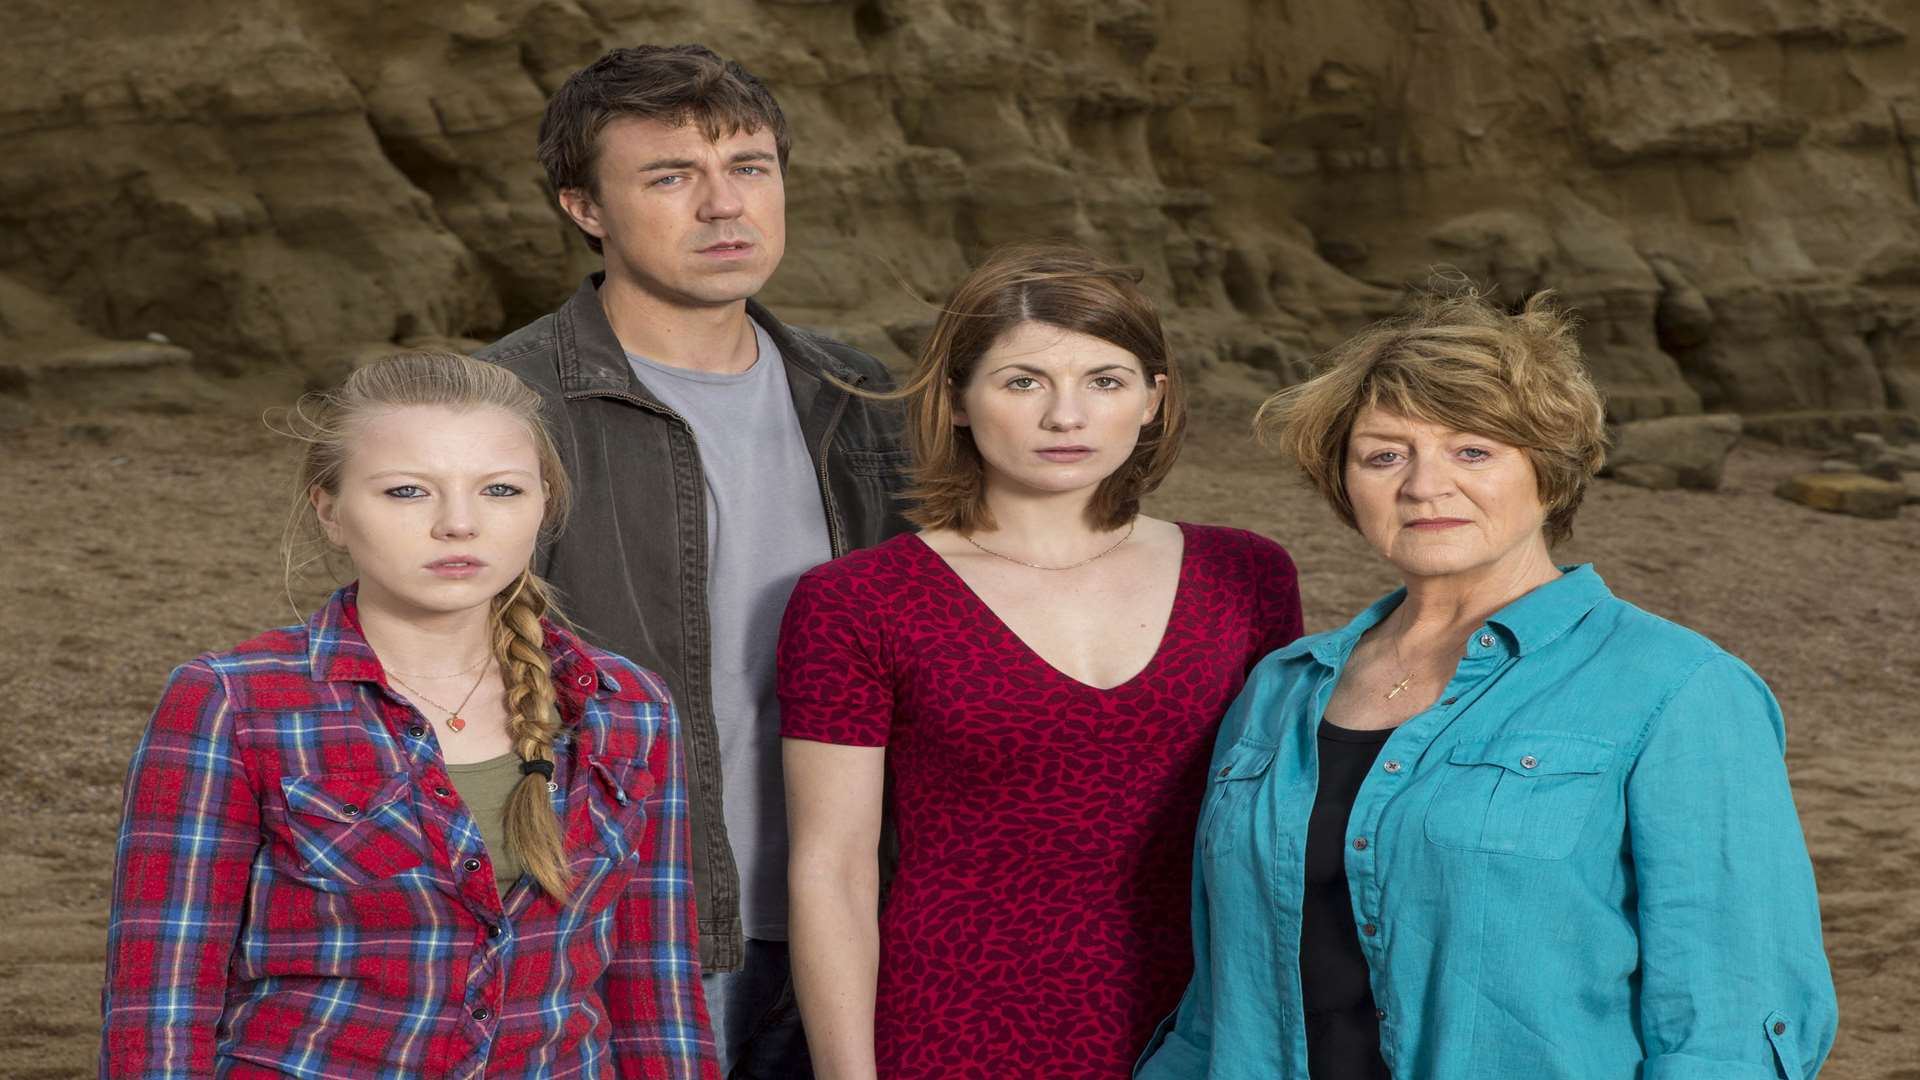 Jodie Whittaker as Beth Latimer (second on the right) in Broadchurch is seen on screens taking up a similar role